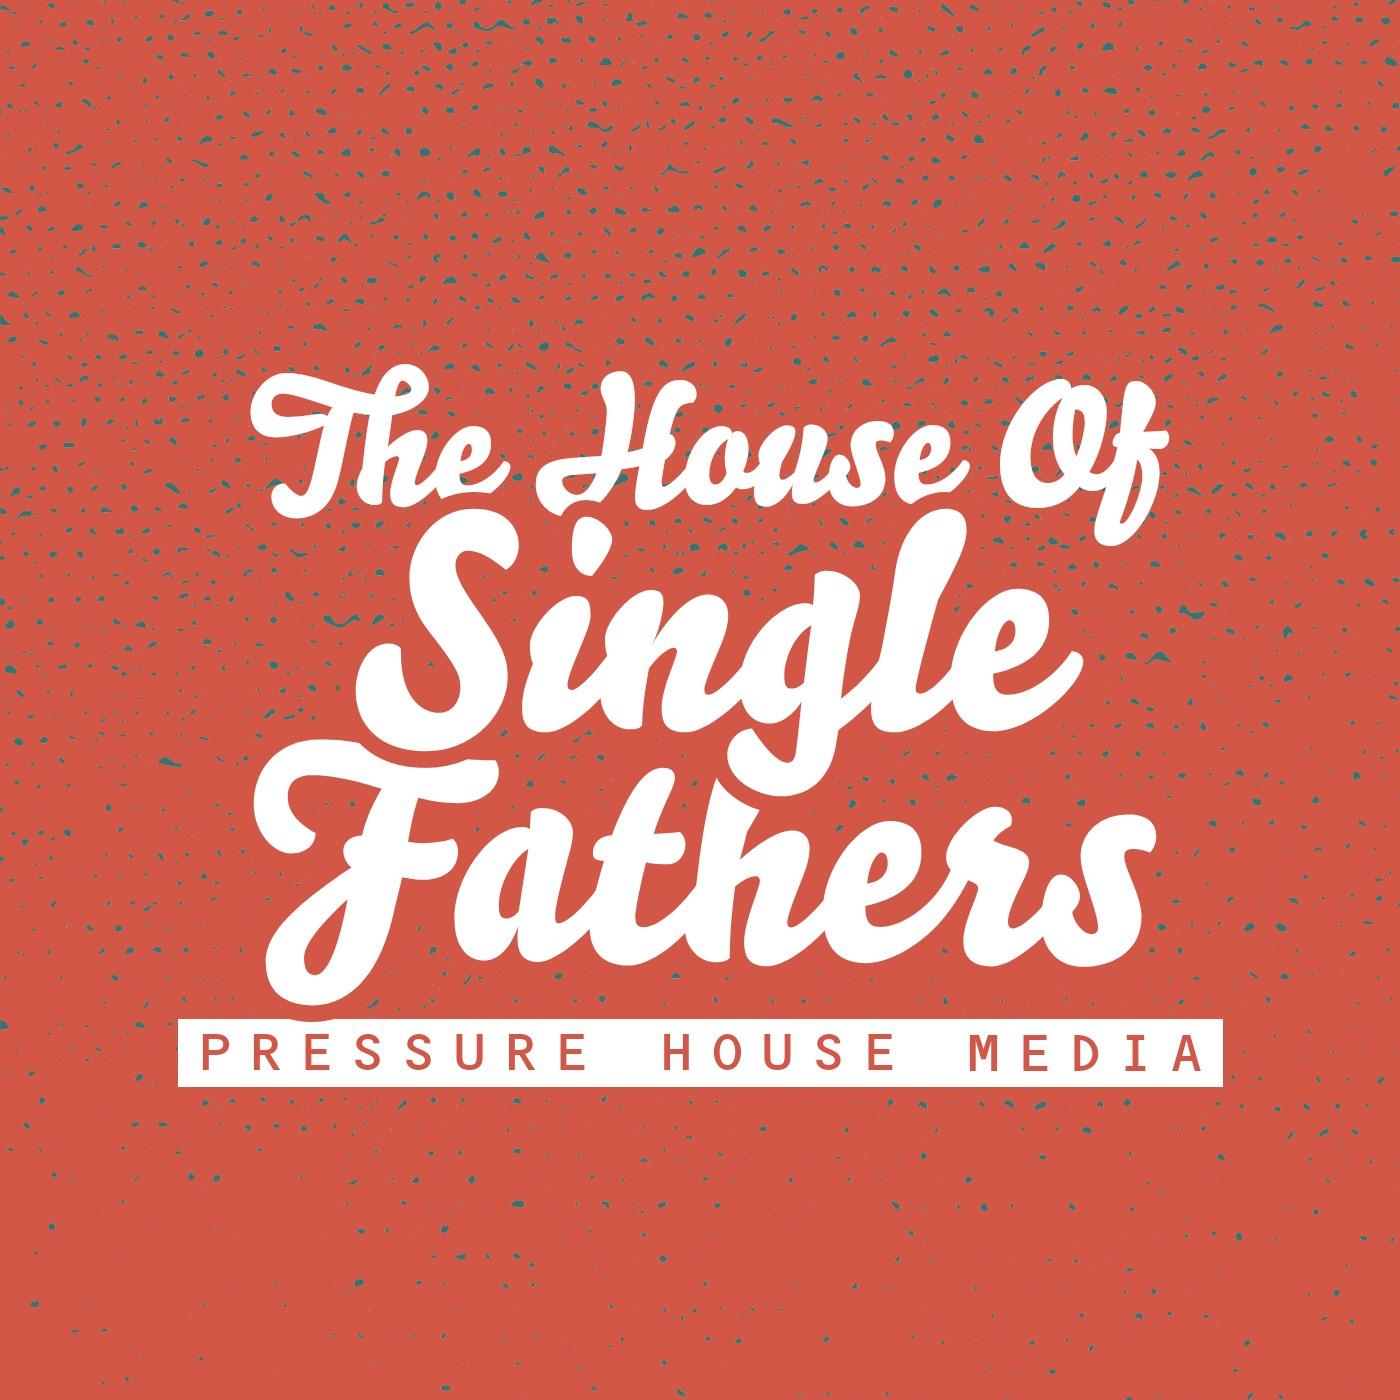 House Of Single Father's